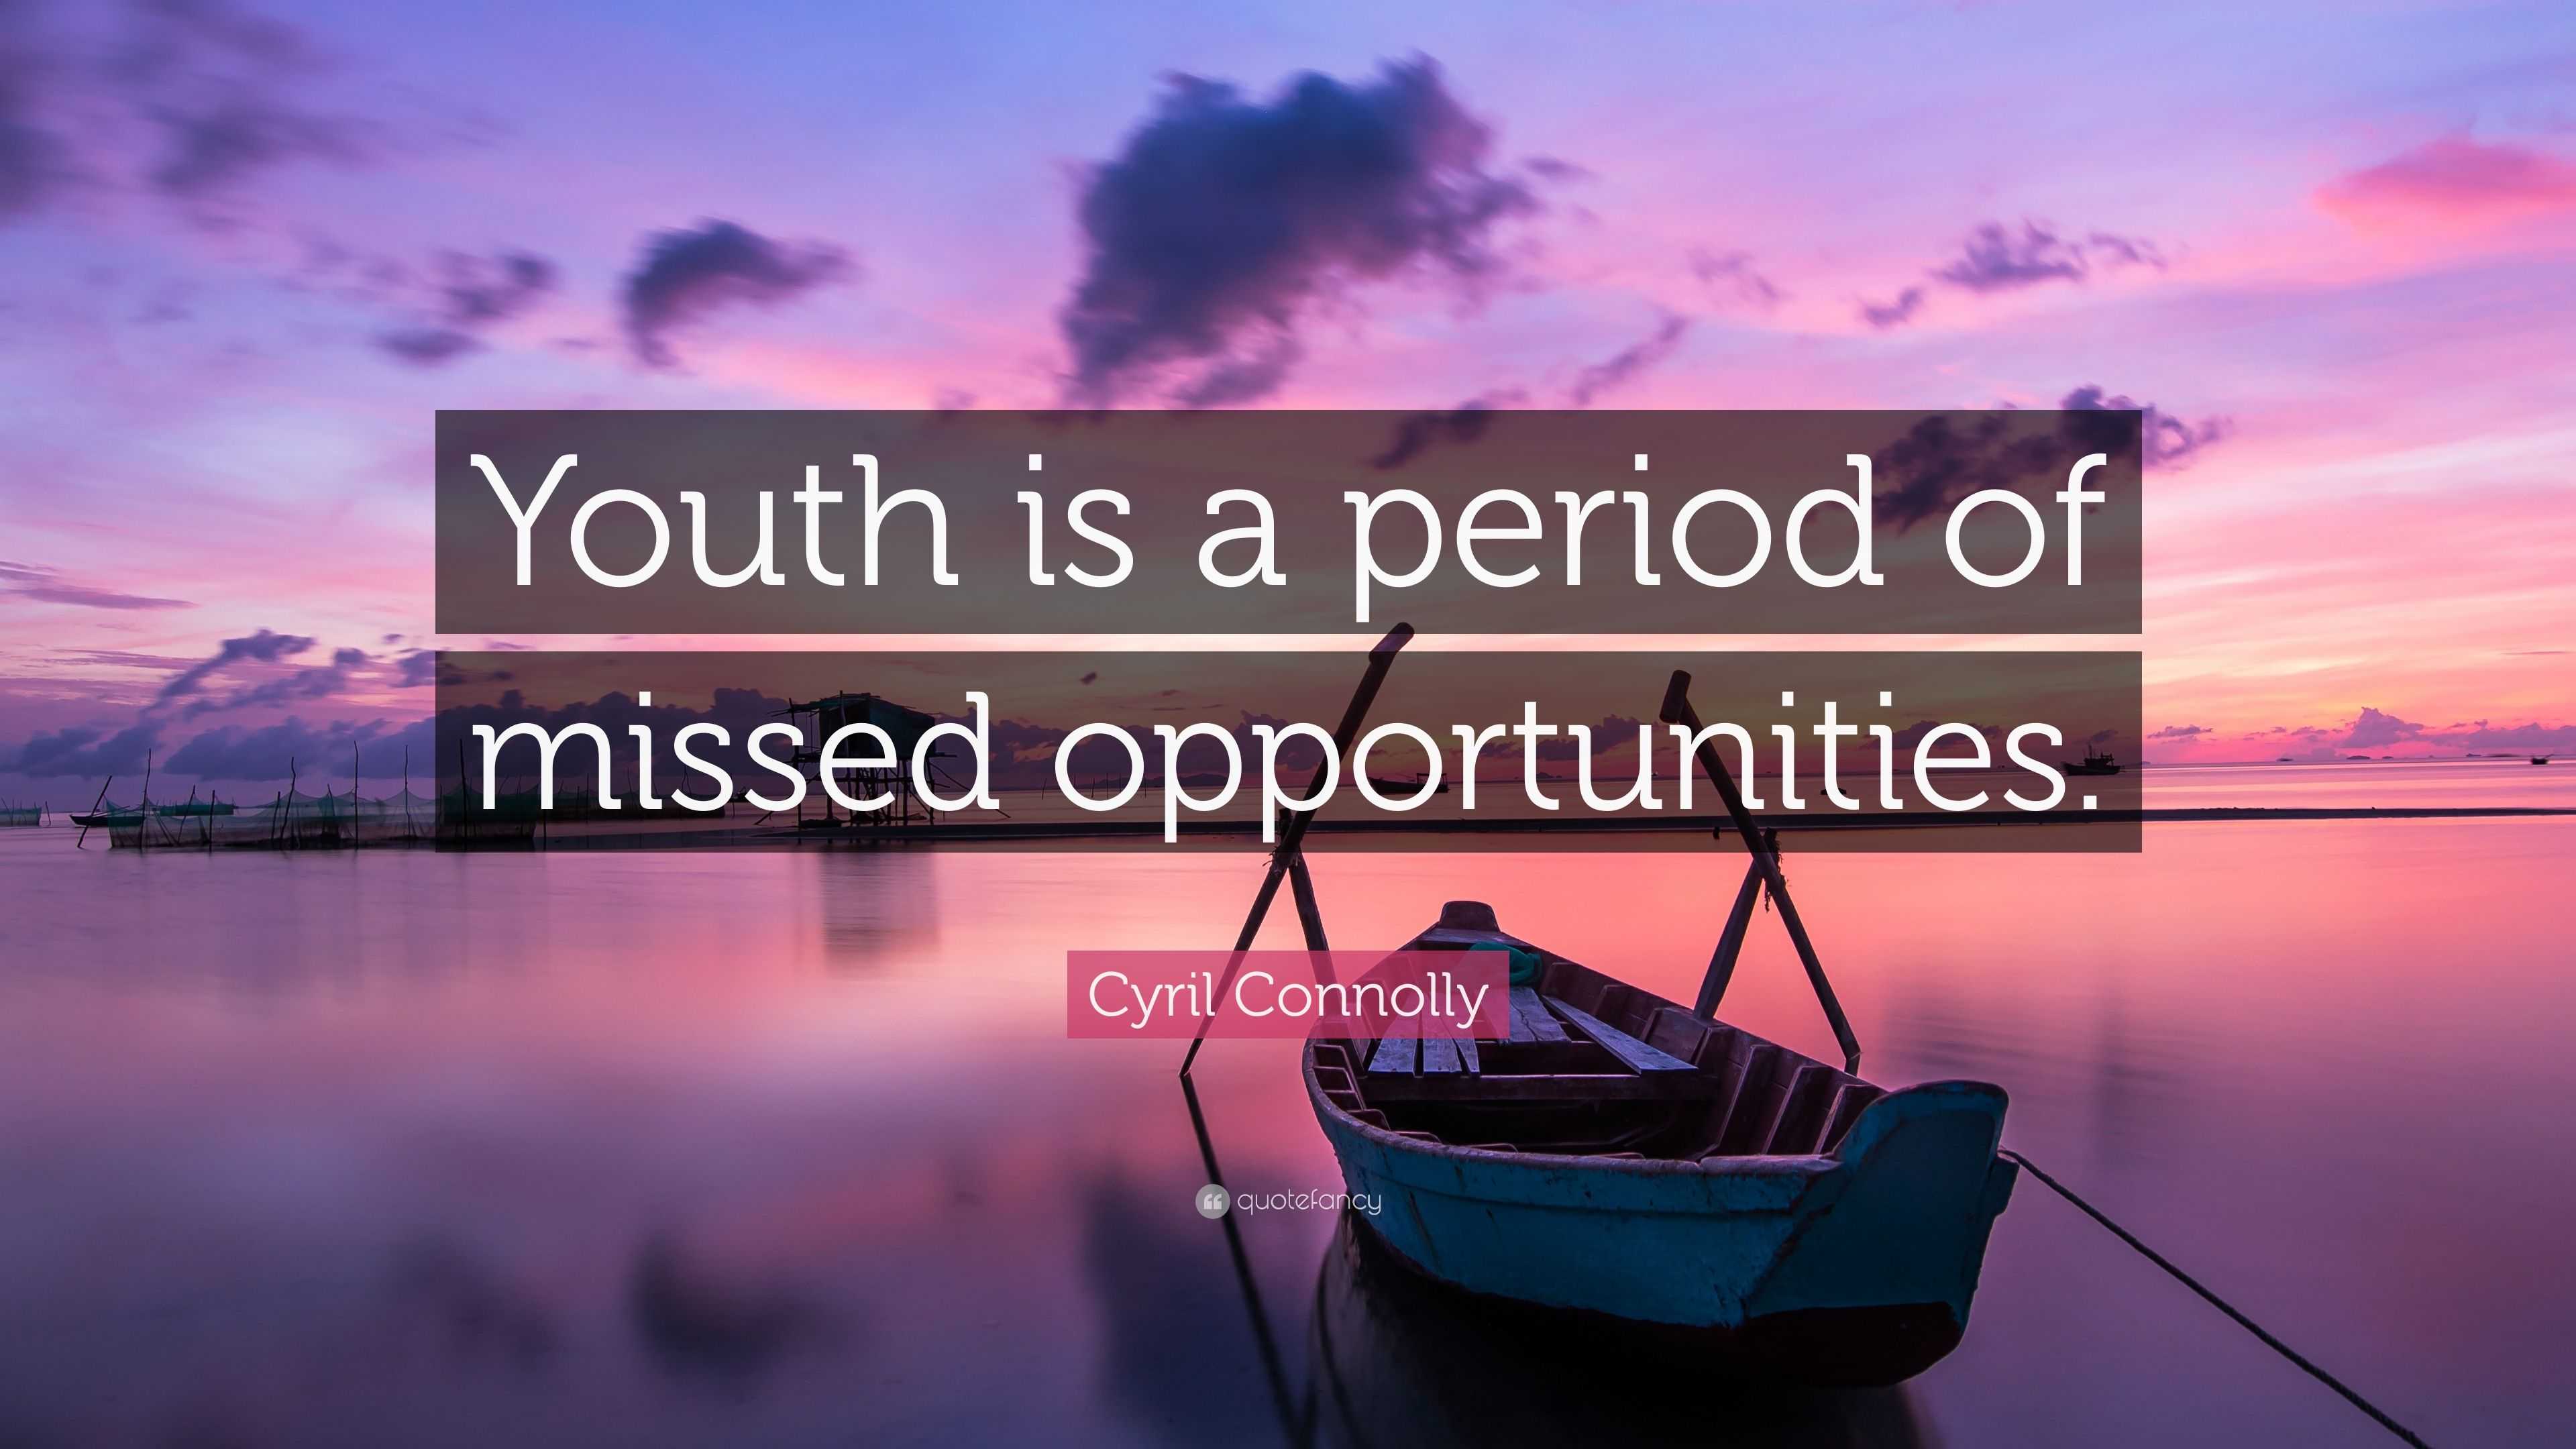 Cyril Connolly Quote “Youth is a period of missed opportunities ”